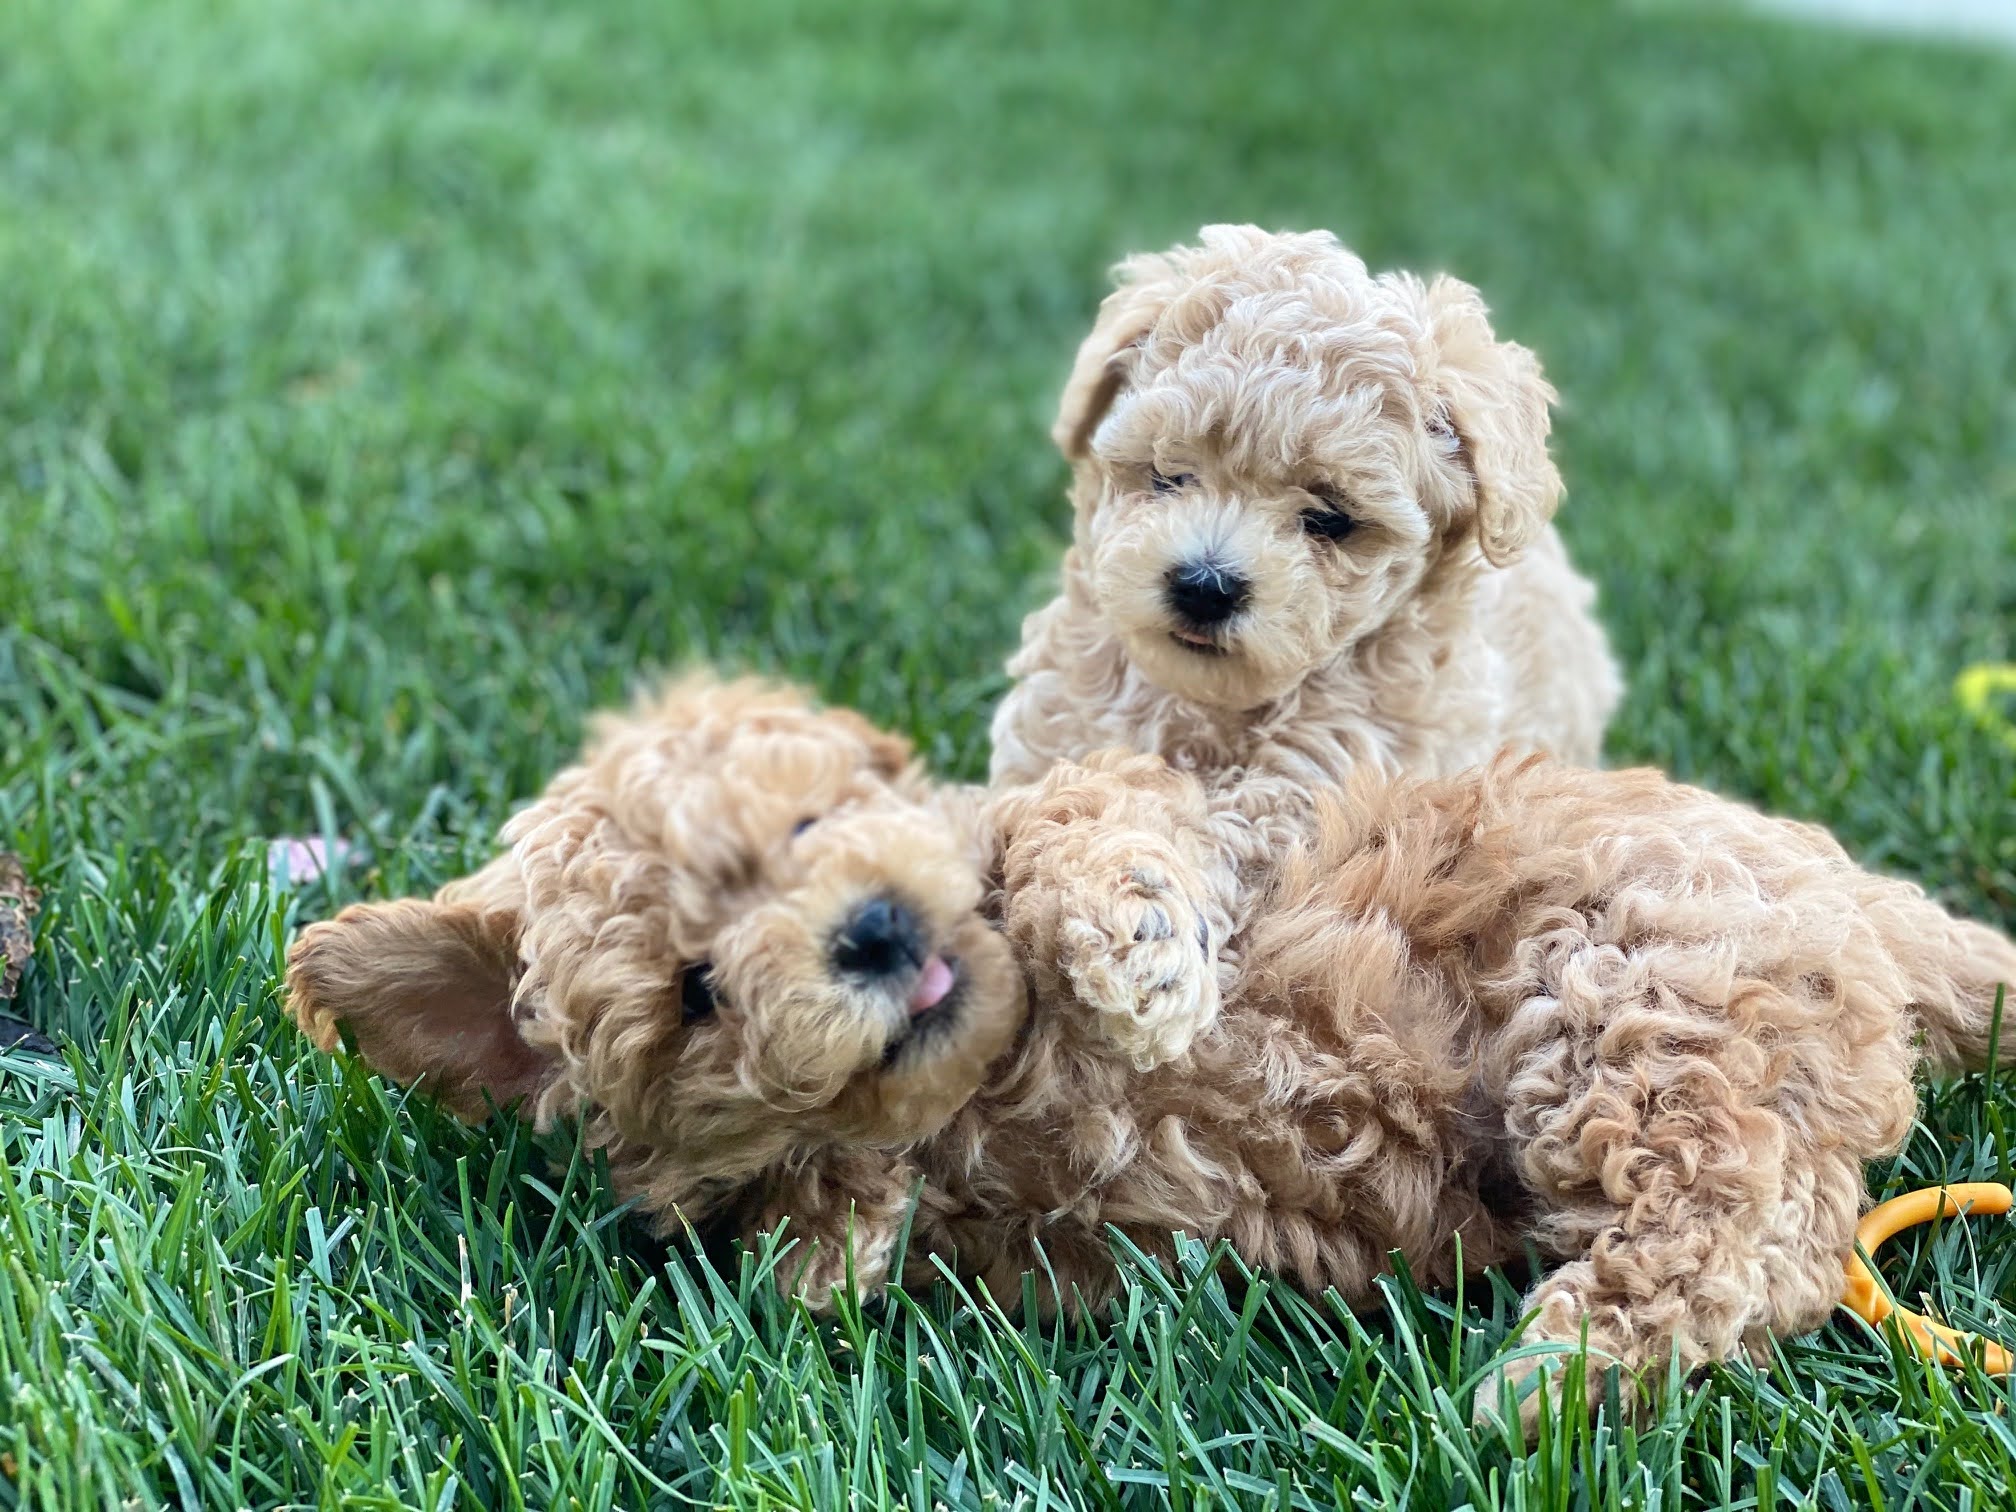 Two young brown poodle puppies energetically frolic amidst the lush green grass